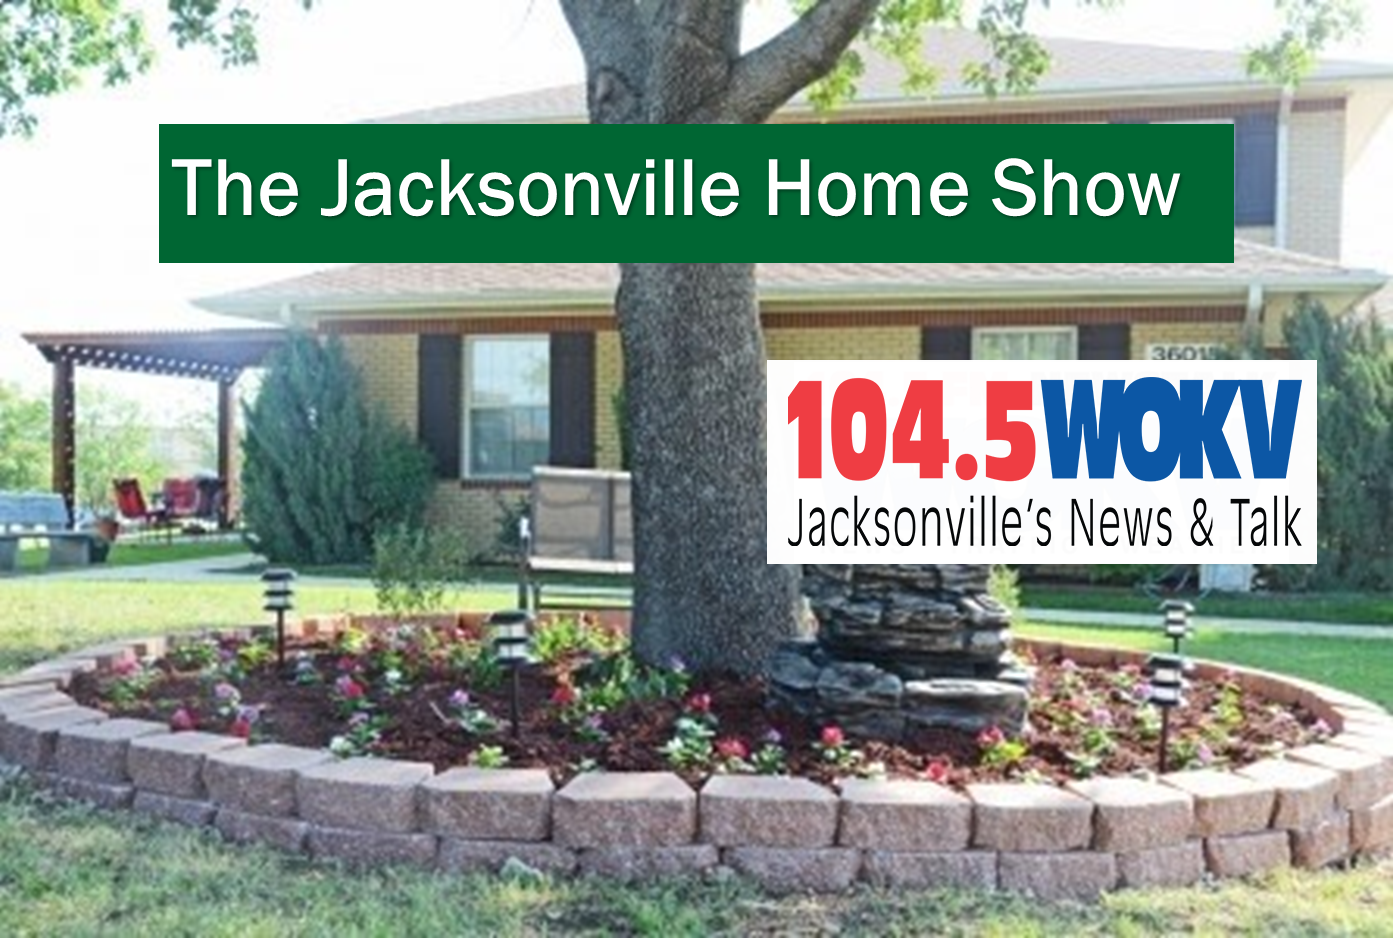 The Jacksonville Home Show